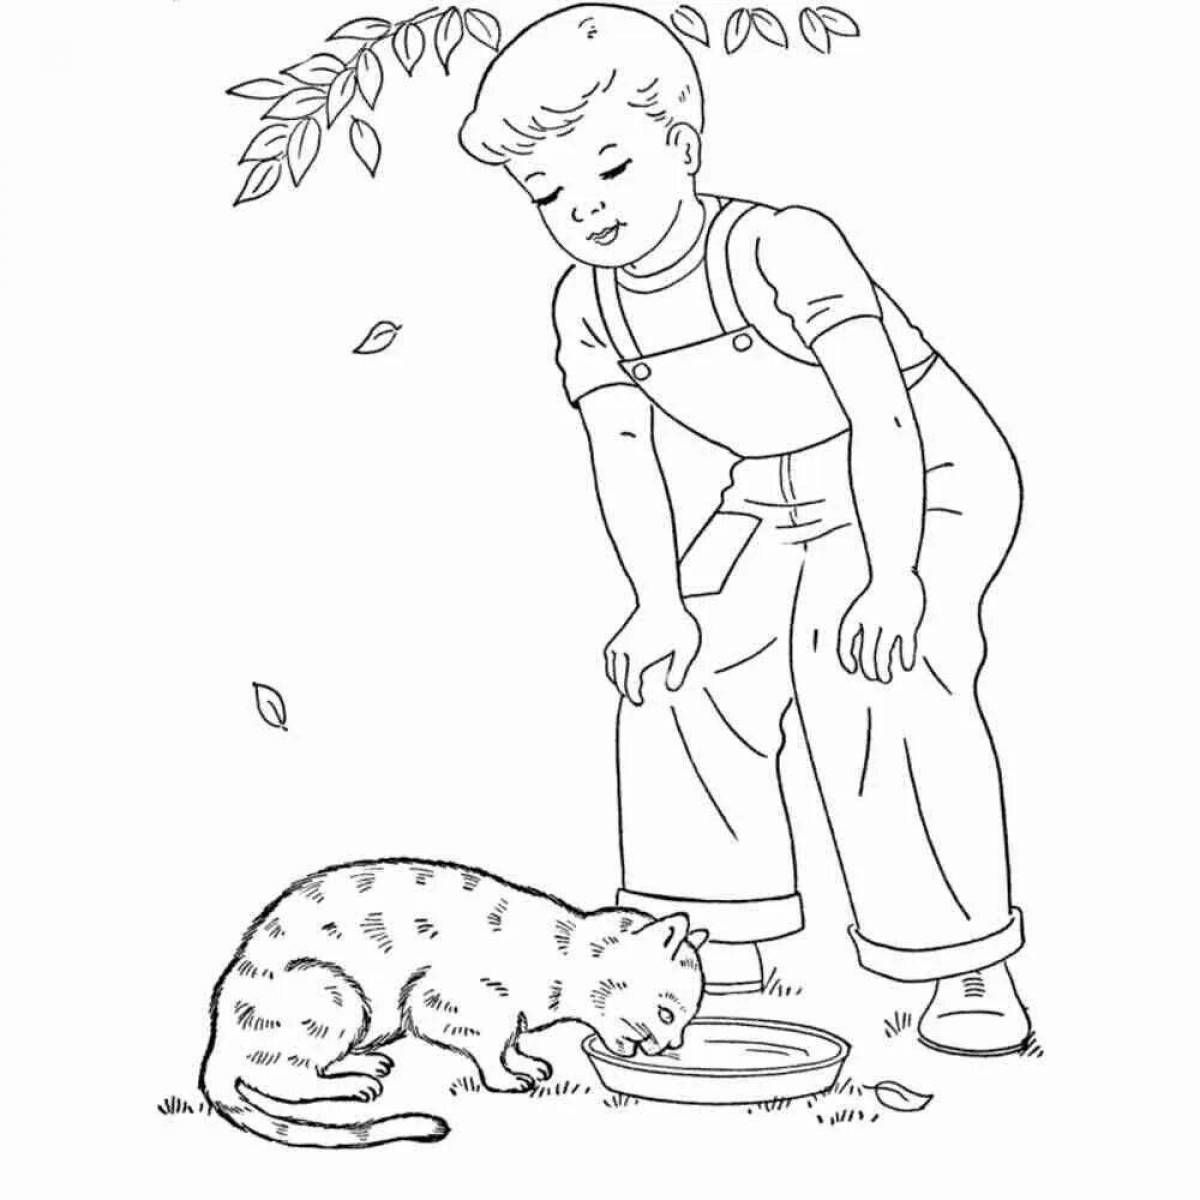 Fun good deeds for kids coloring pages